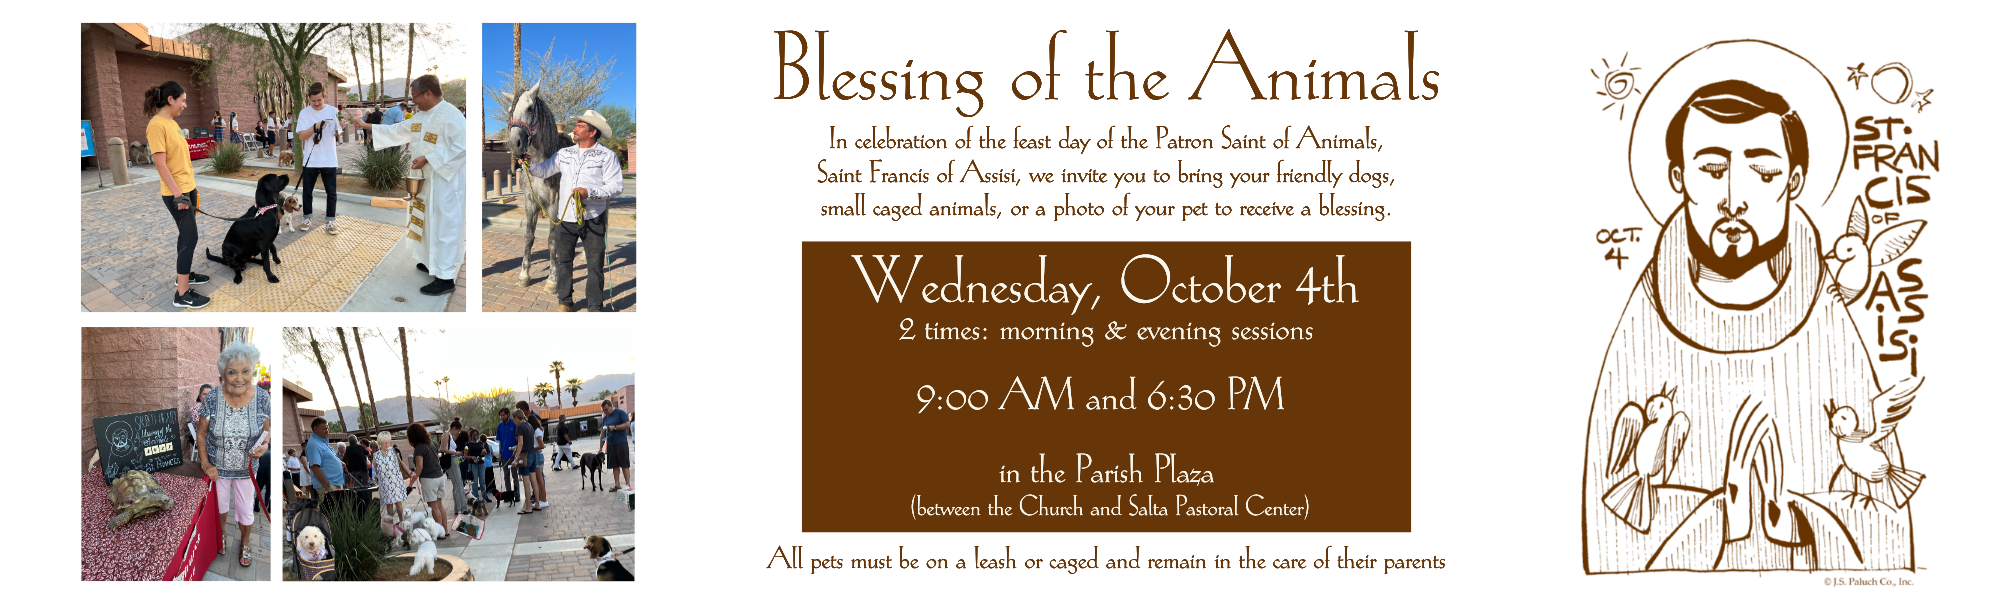 Blessing of the Animals Oct 4